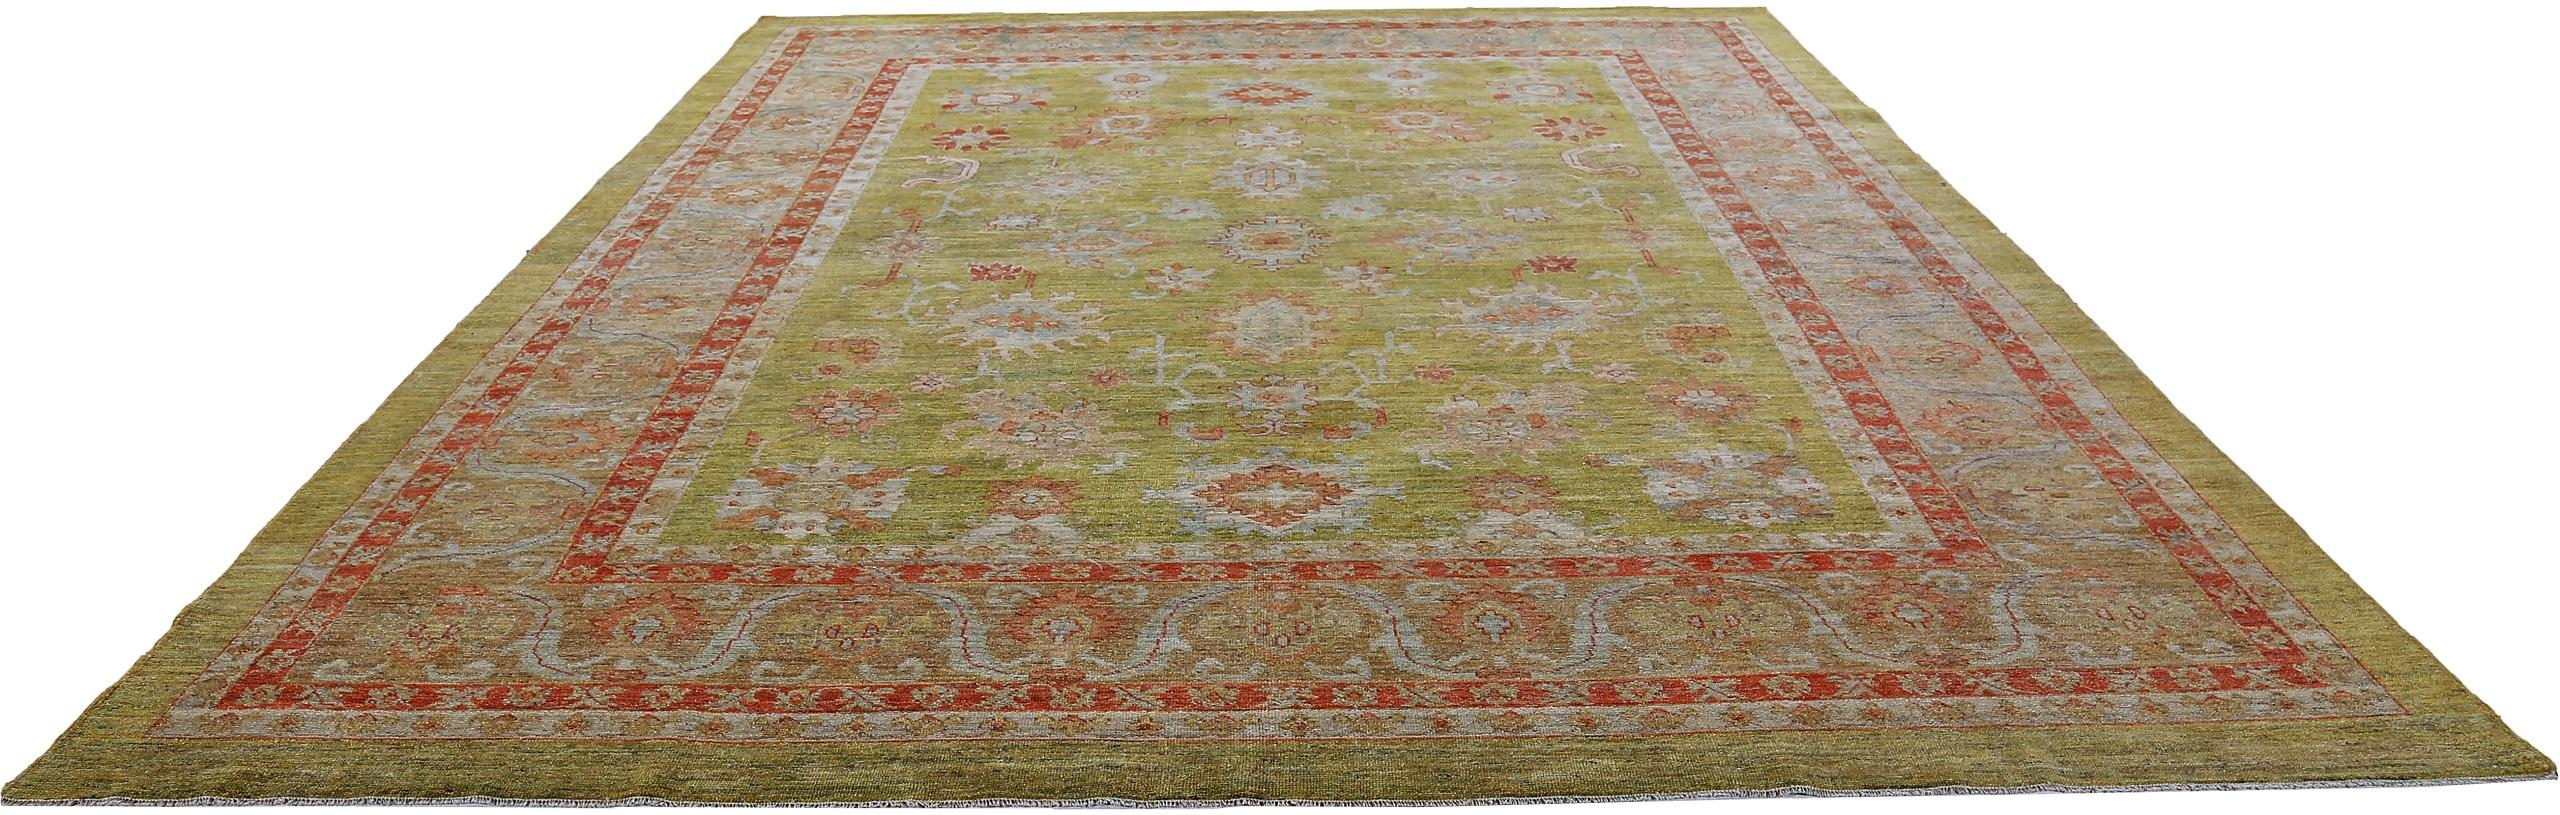 Hand-Knotted Nazmiyal Collection Green Modern Turkish Oushak Area Rug 11 ft 5 in x 14 ft